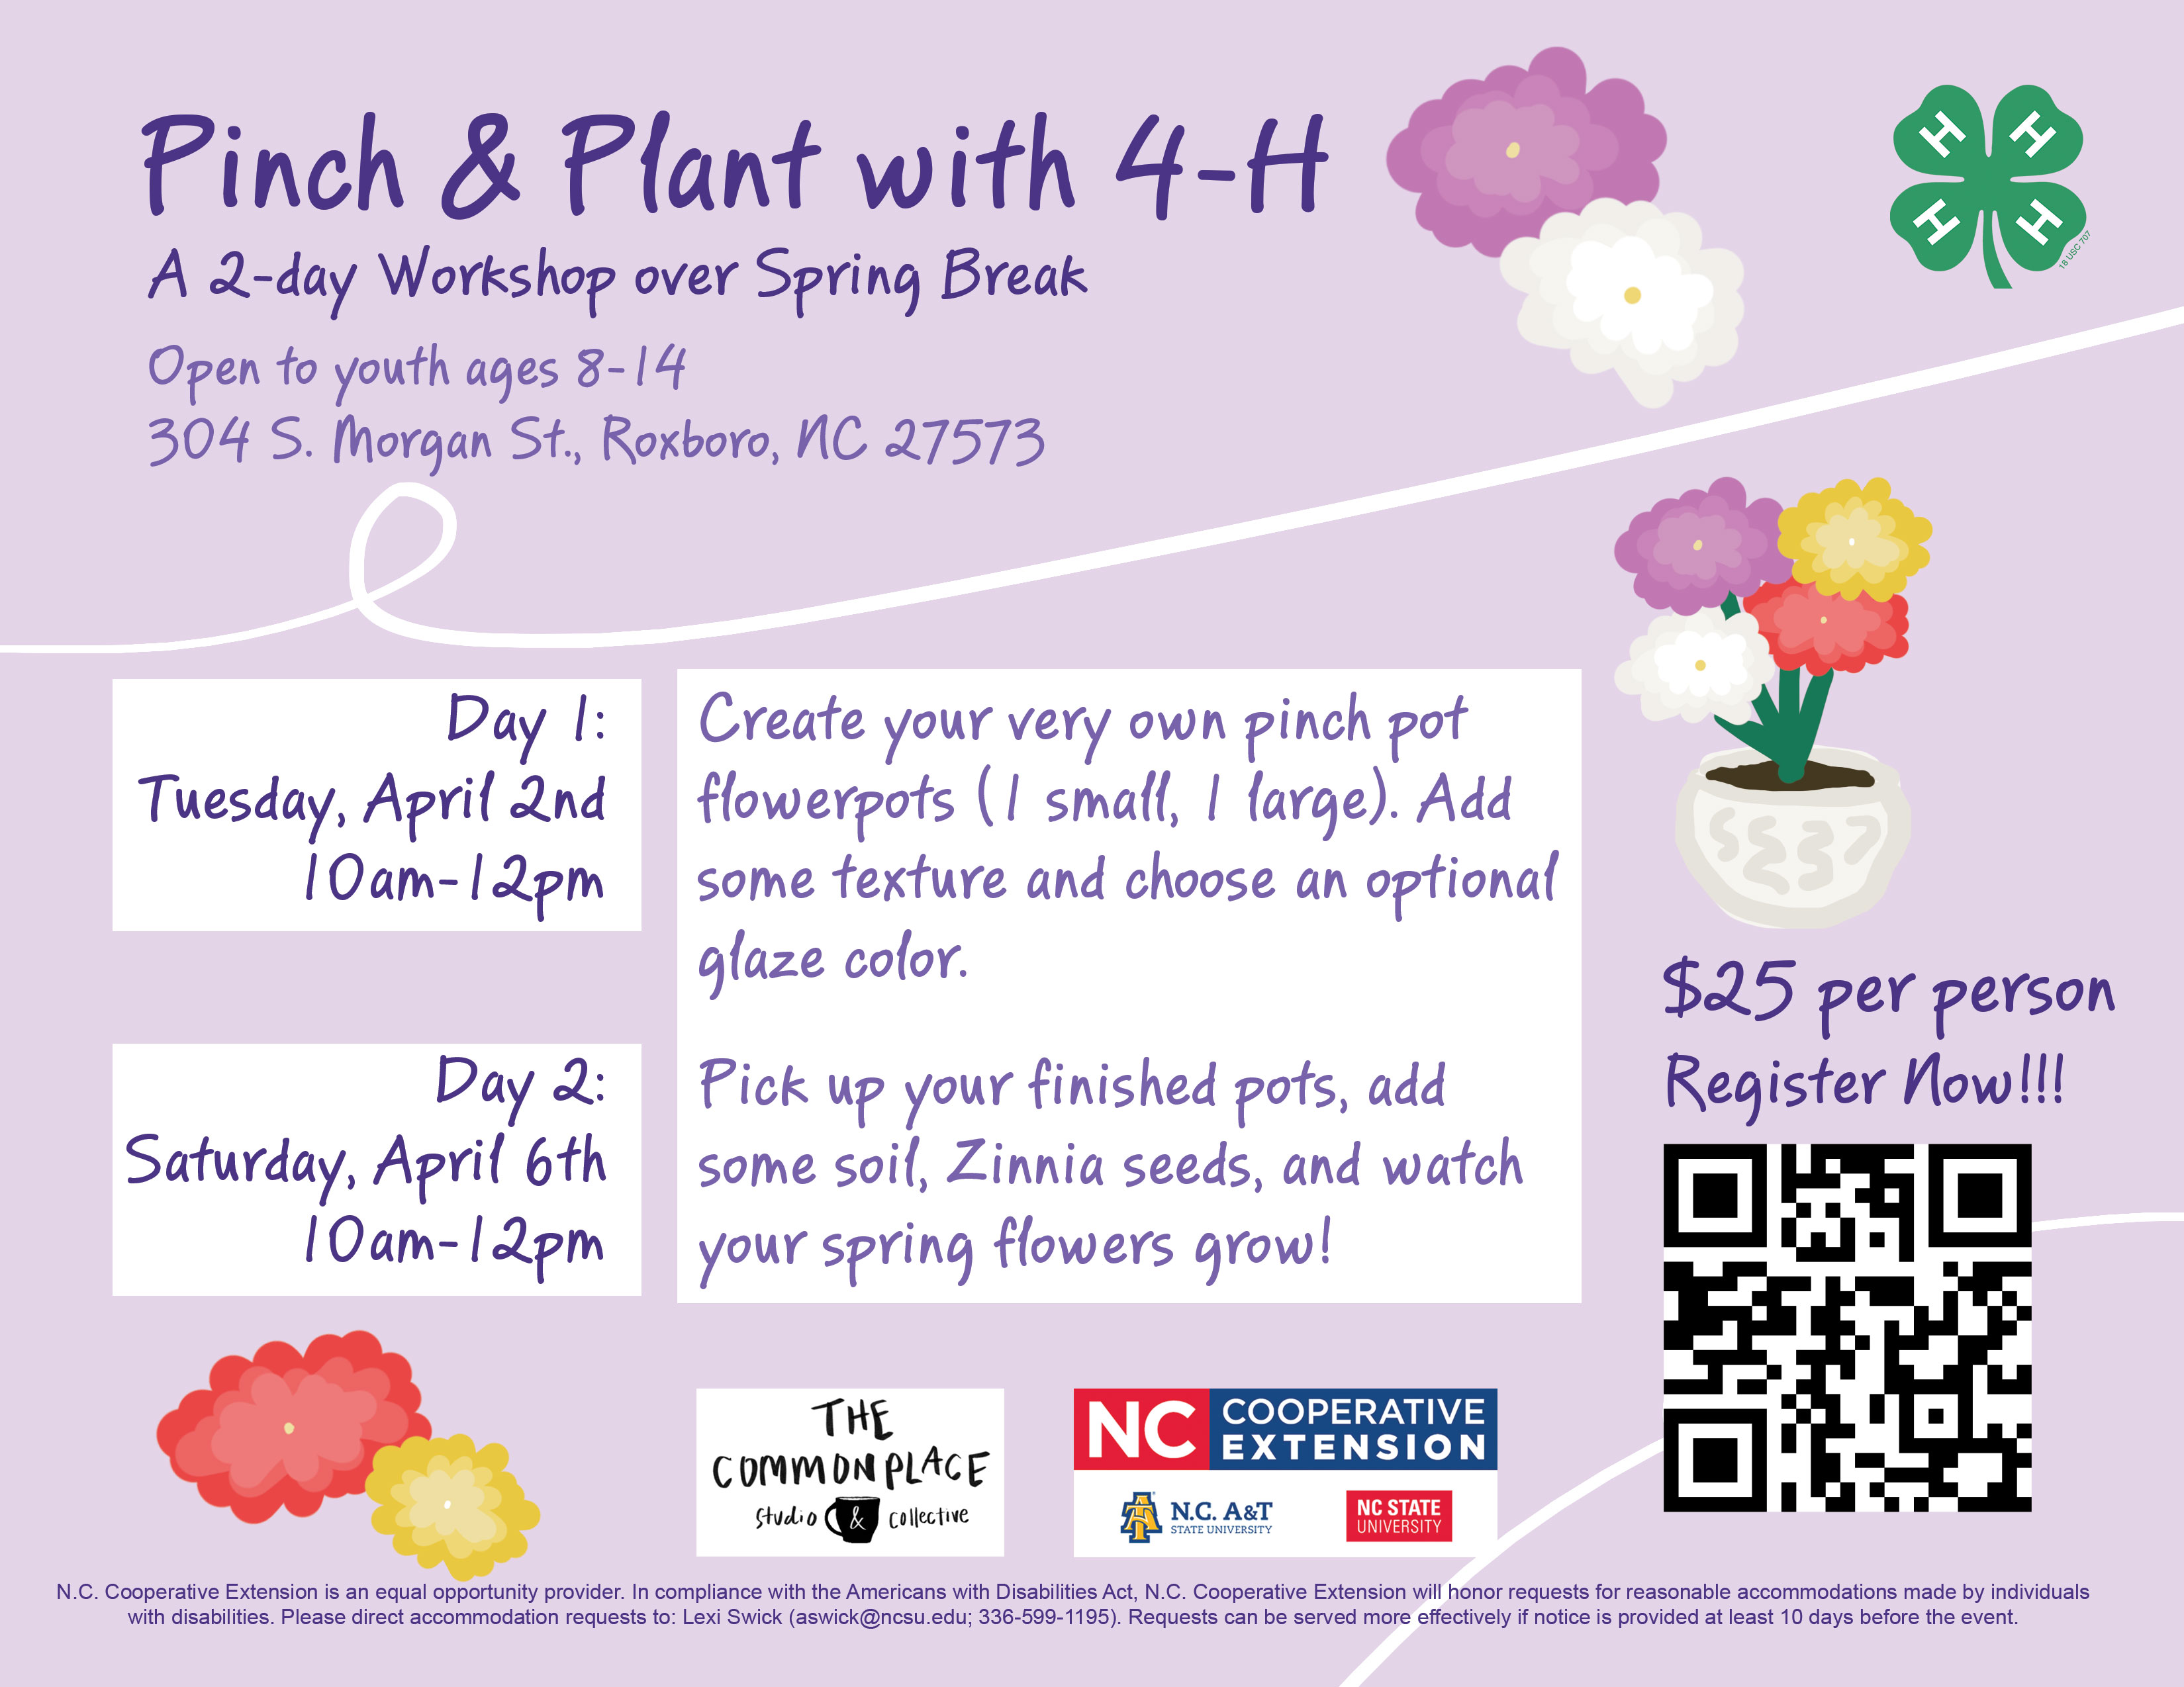 Pinch & Plant With 4-H: A 2-day Spring Break Workshop! Contact Lexi Swick (aswick@ncsu.edu; 336-599-1195) for more info!